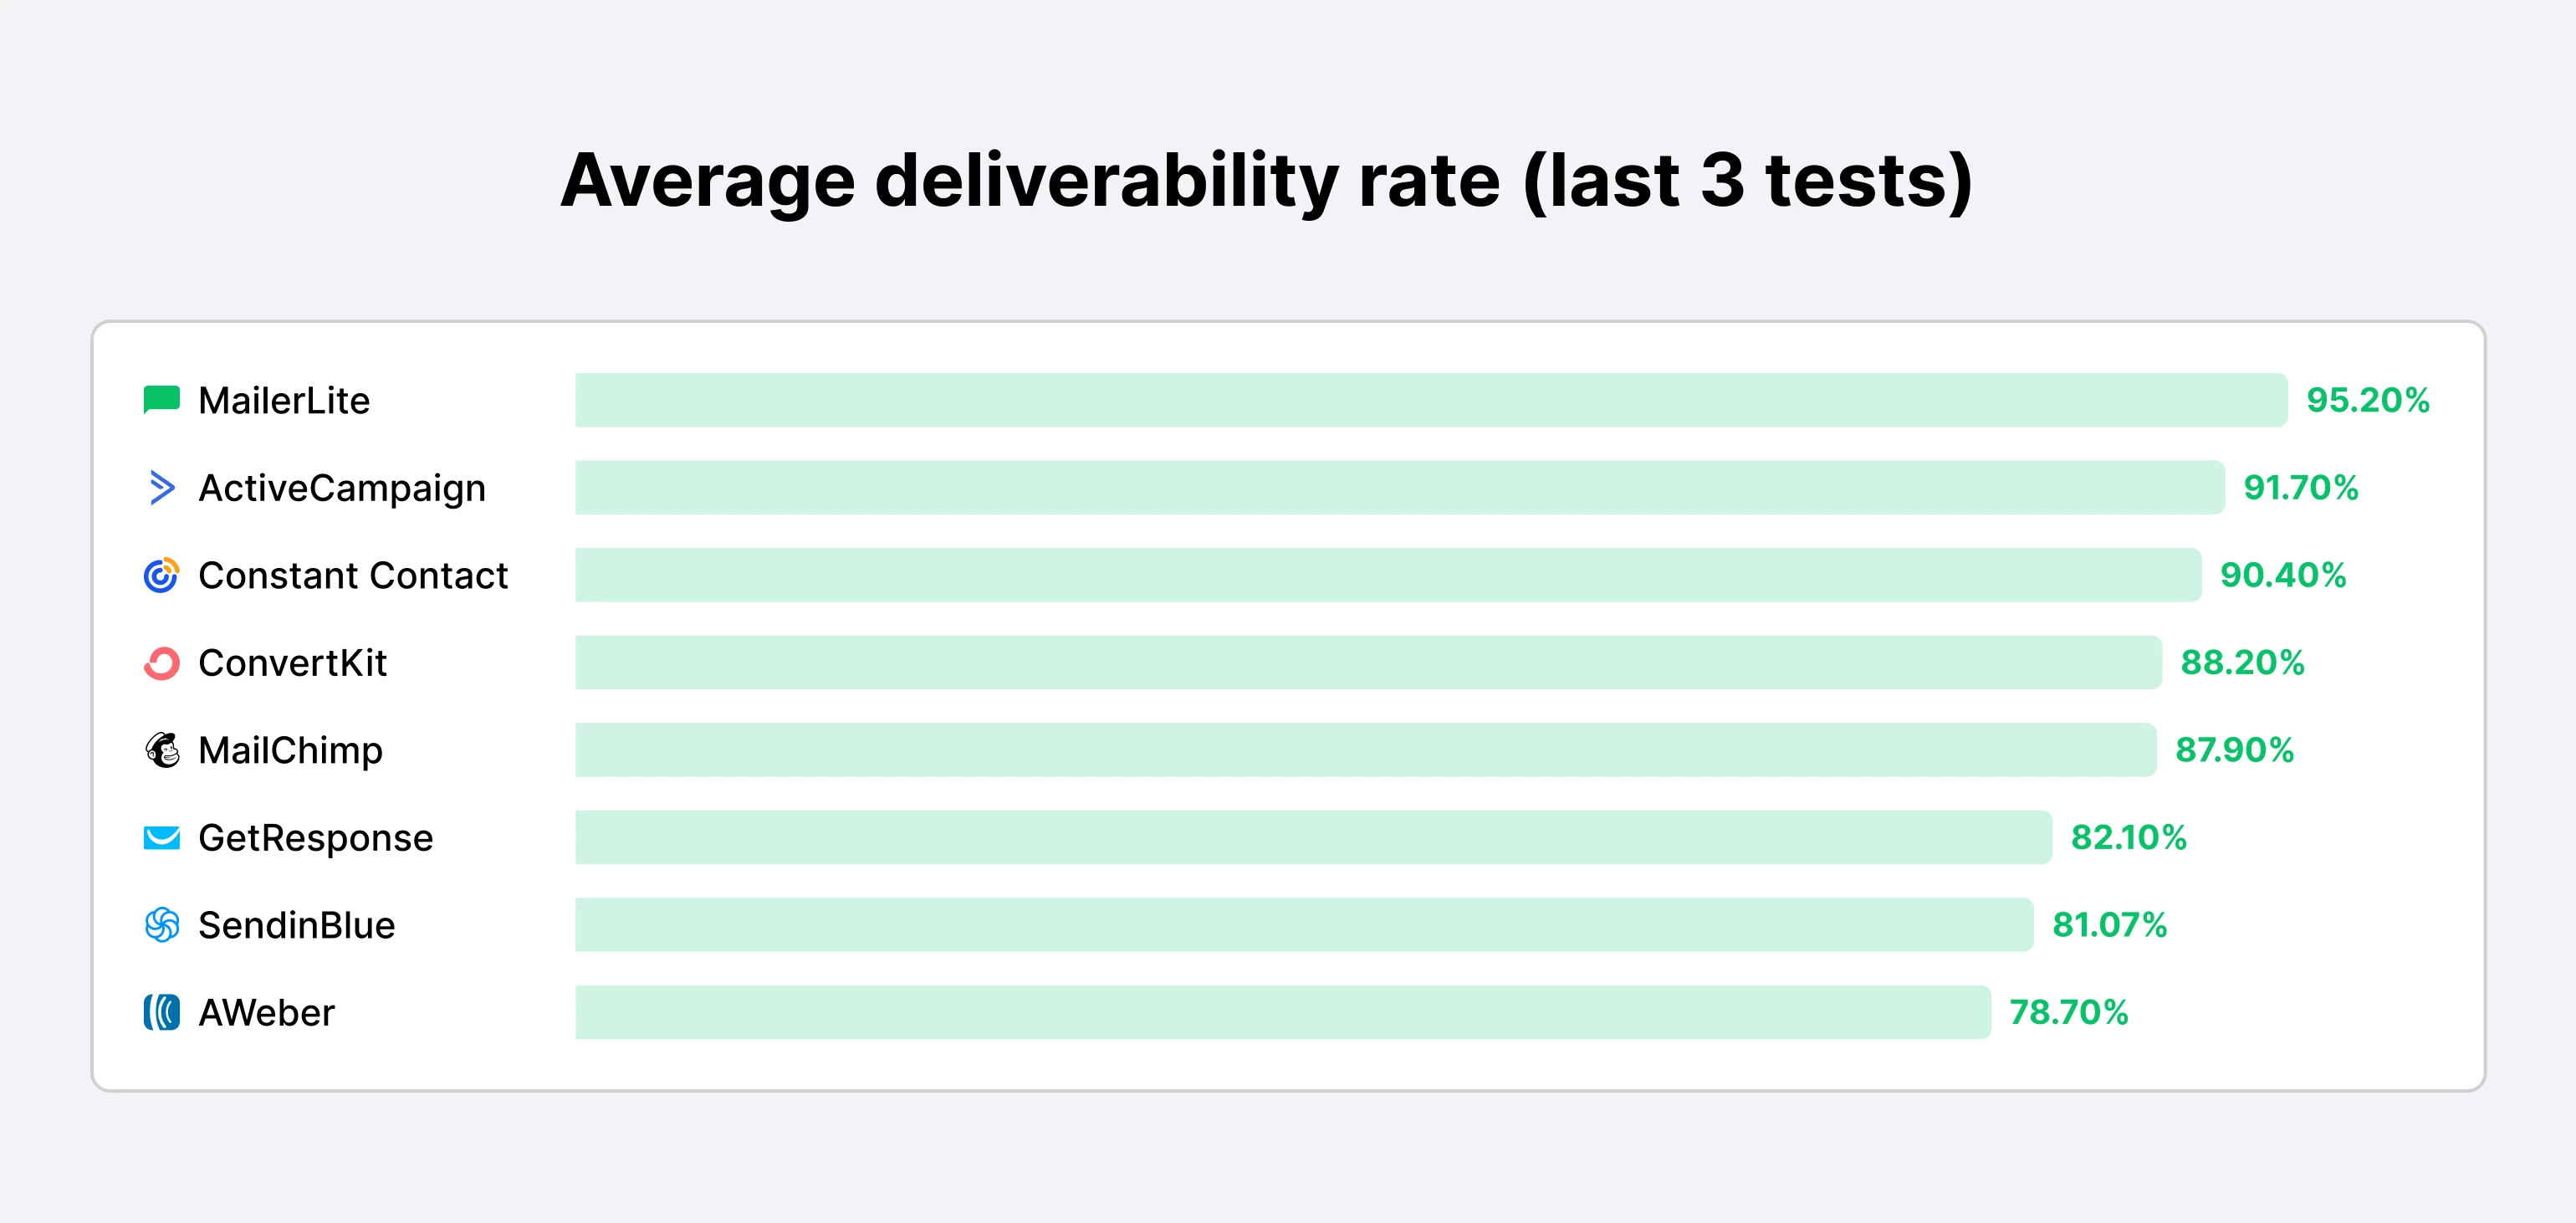 Share showing deliverability rates of ESPs from highest to lowest